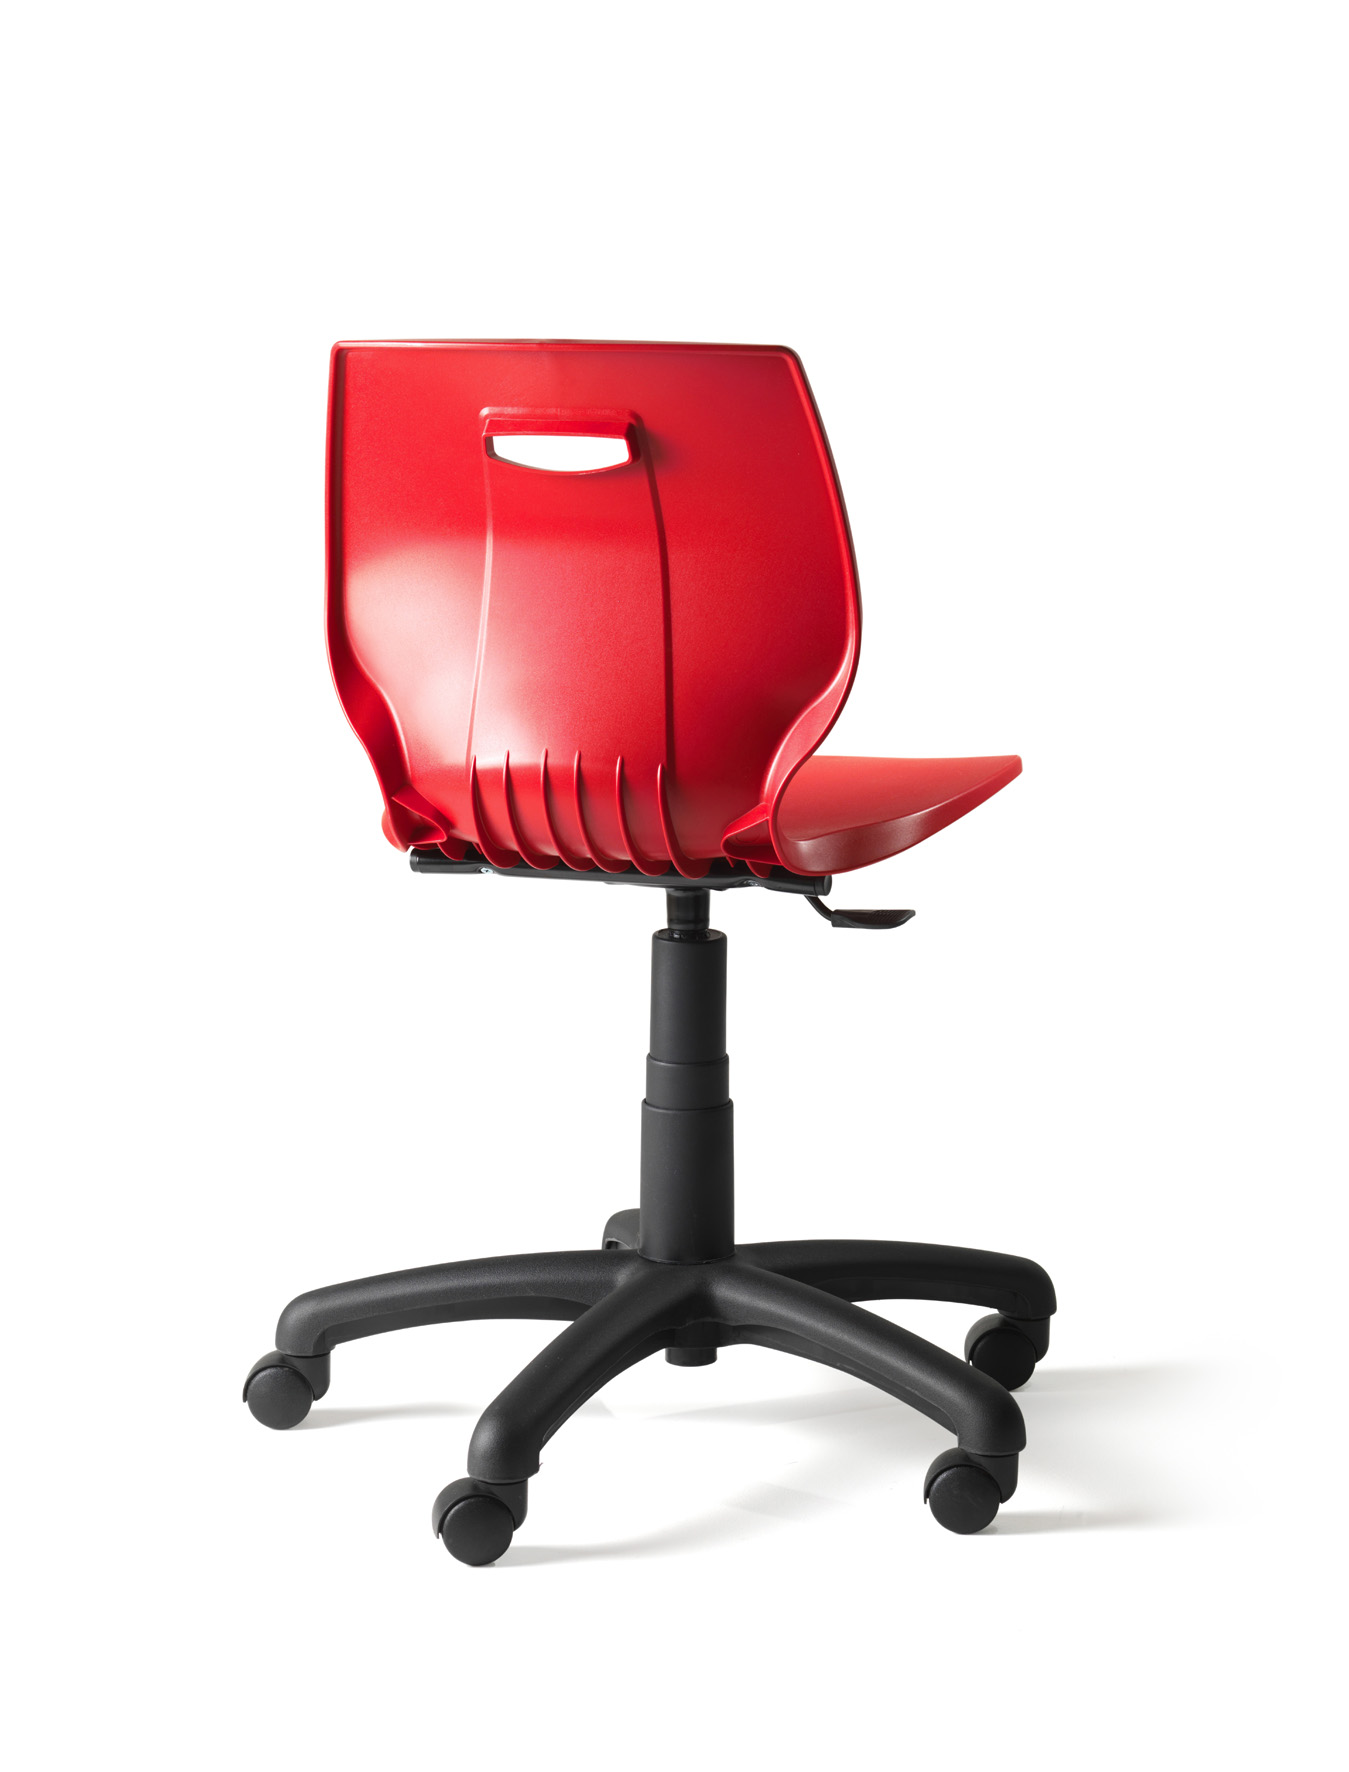 Advanced Geo ICT Student Classroom Chair Senior and Junior sizes various colours